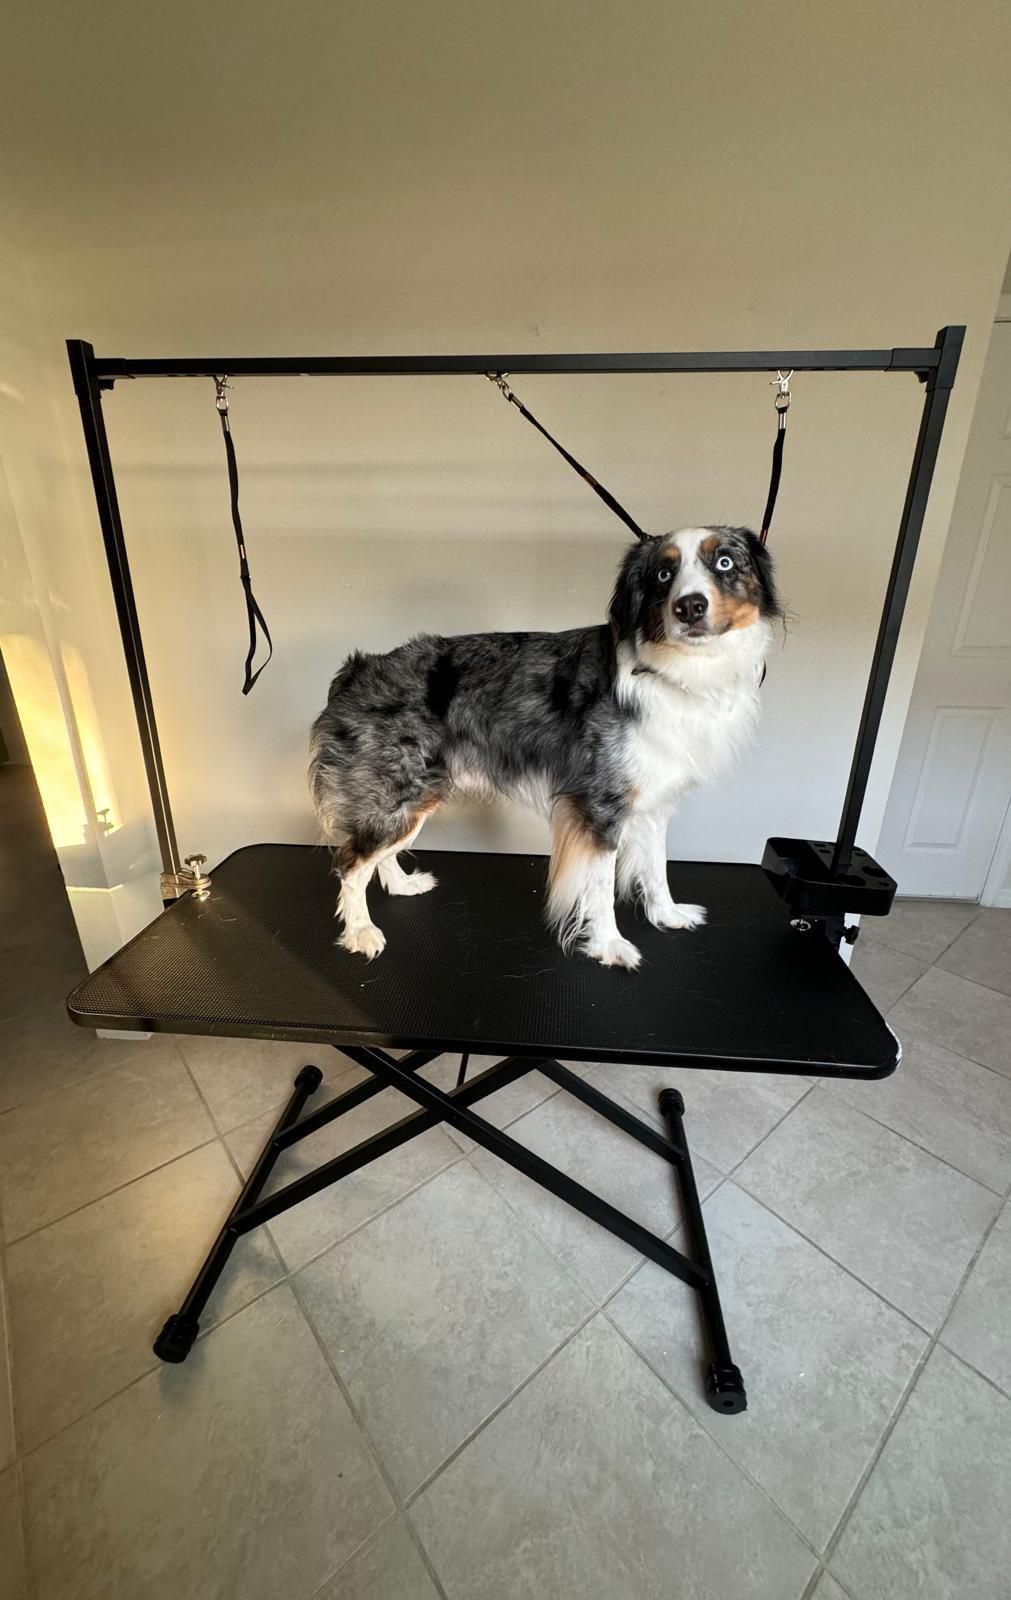 ROOMTEC 47 Inch Dog Grooming Table